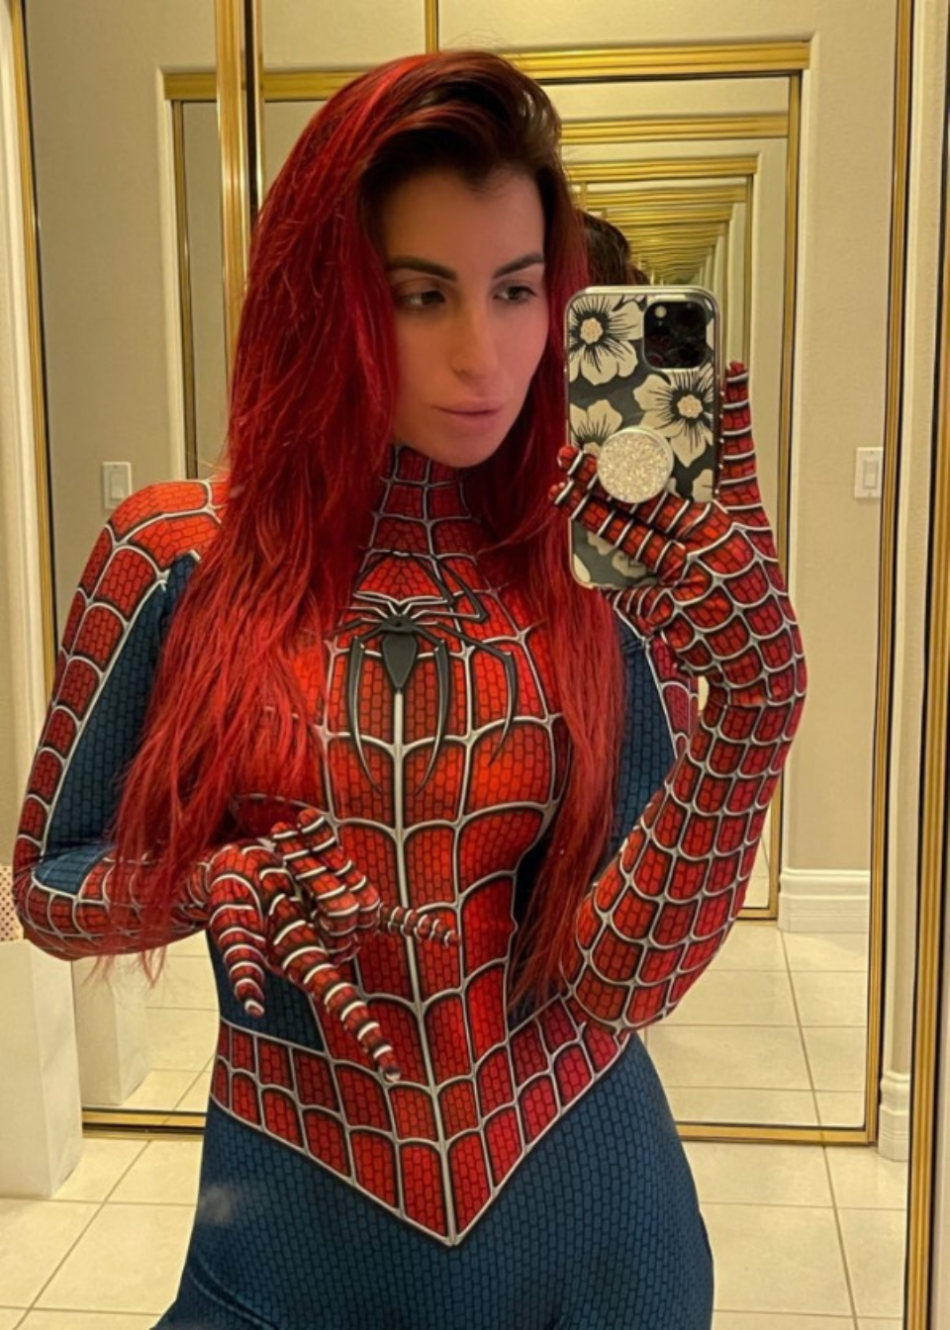 Sexy Red Hot Cosplay Girls Spiderman Women Best Photo Compilation 2021 (89 HQ Photos) 86